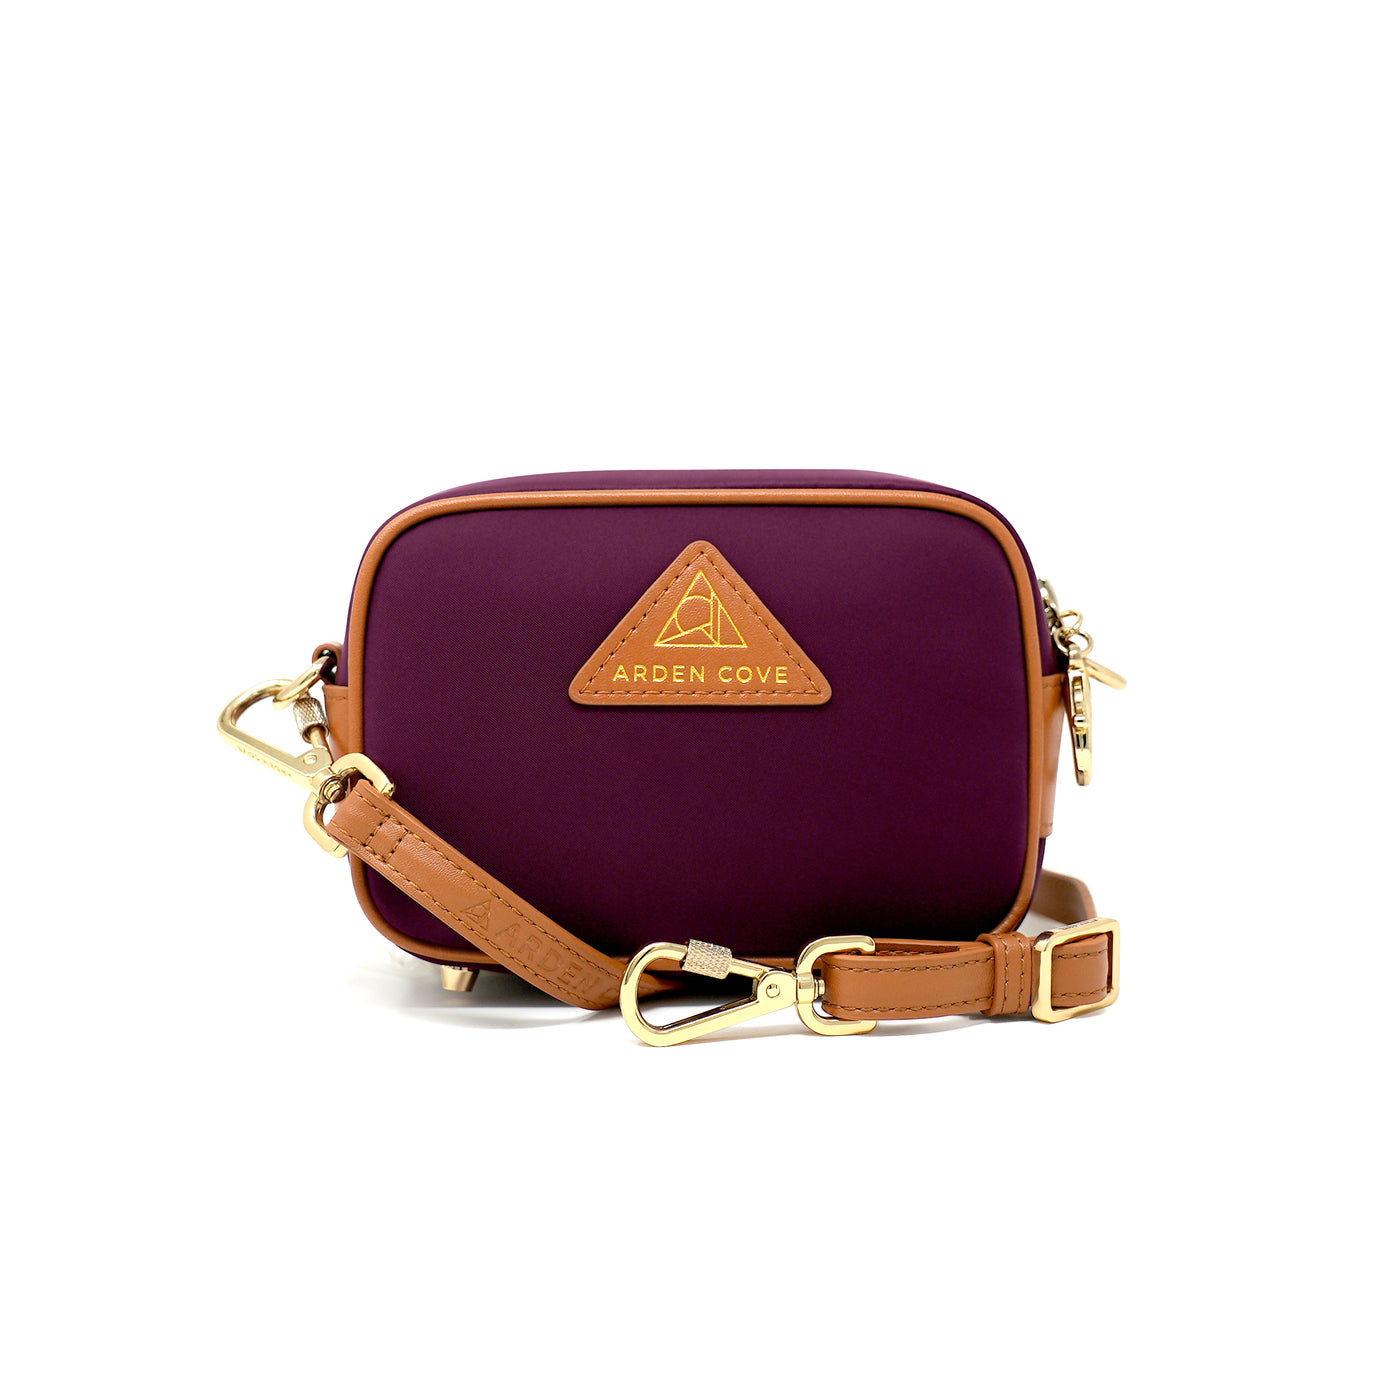 Anti-theft Water-resistant Travel Crossbody - Crissy Mini Crossbody in Maroon Gold with slash-resistant faux leather & locking clasps straps - front view - Arden Cove